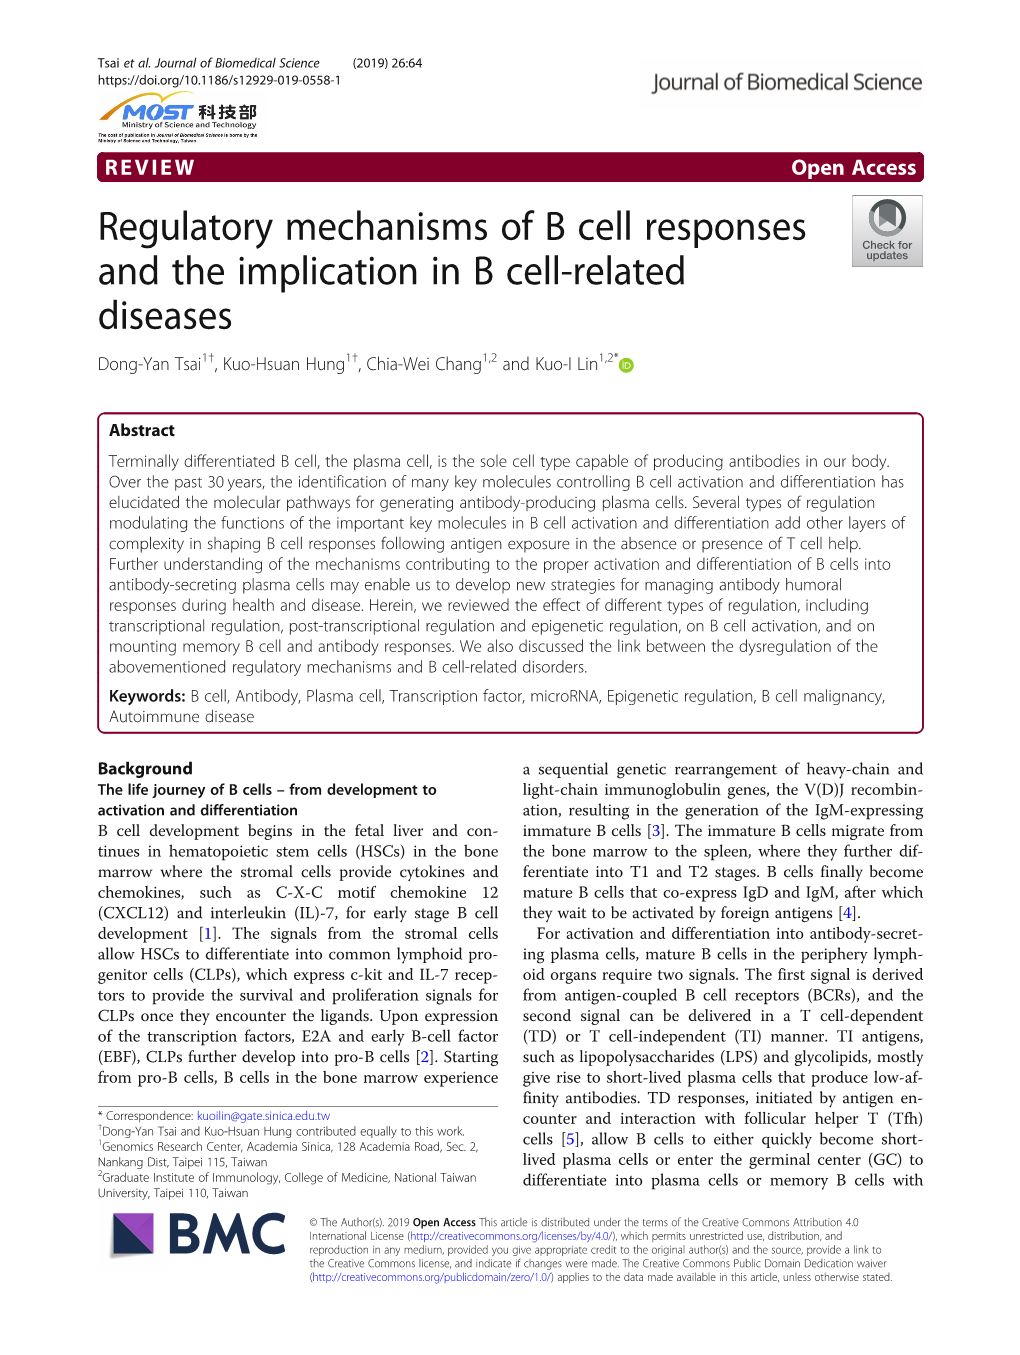 Regulatory Mechanisms of B Cell Responses and the Implication in B Cell-Related Diseases Dong-Yan Tsai1†, Kuo-Hsuan Hung1†, Chia-Wei Chang1,2 and Kuo-I Lin1,2*